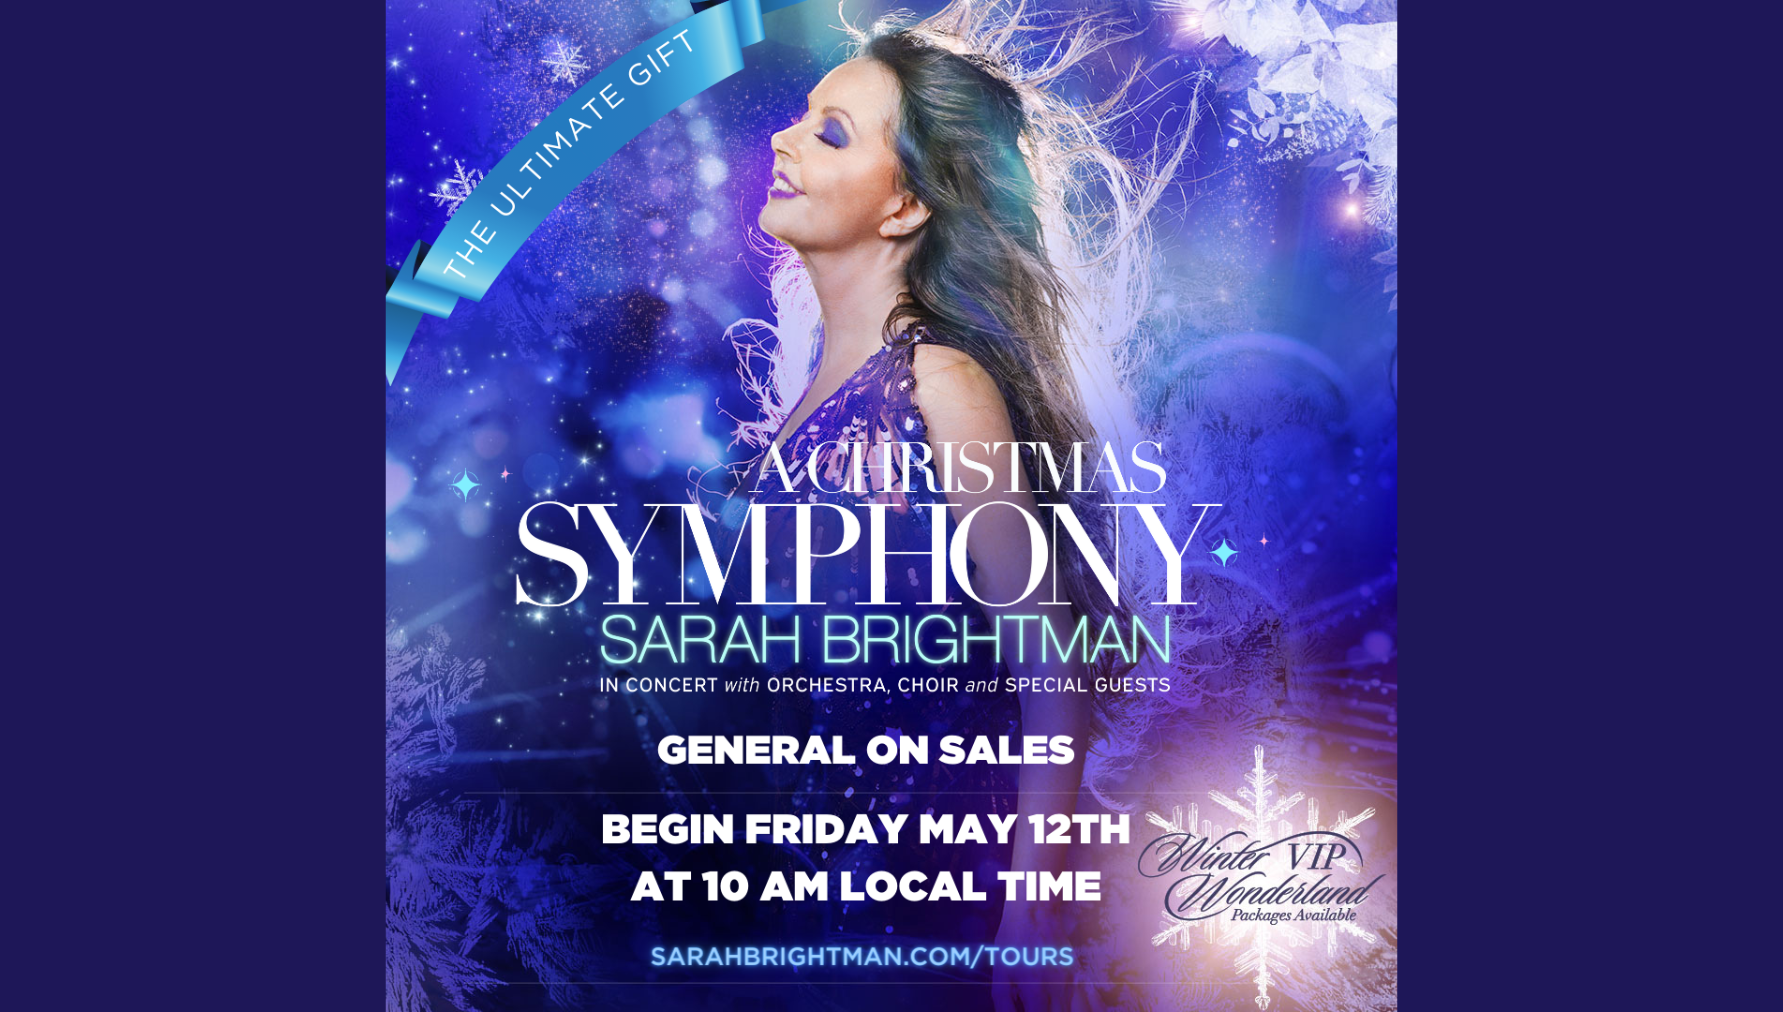 General On Sales for Sarah's 'A Christmas Symphony' begin Friday, May ...